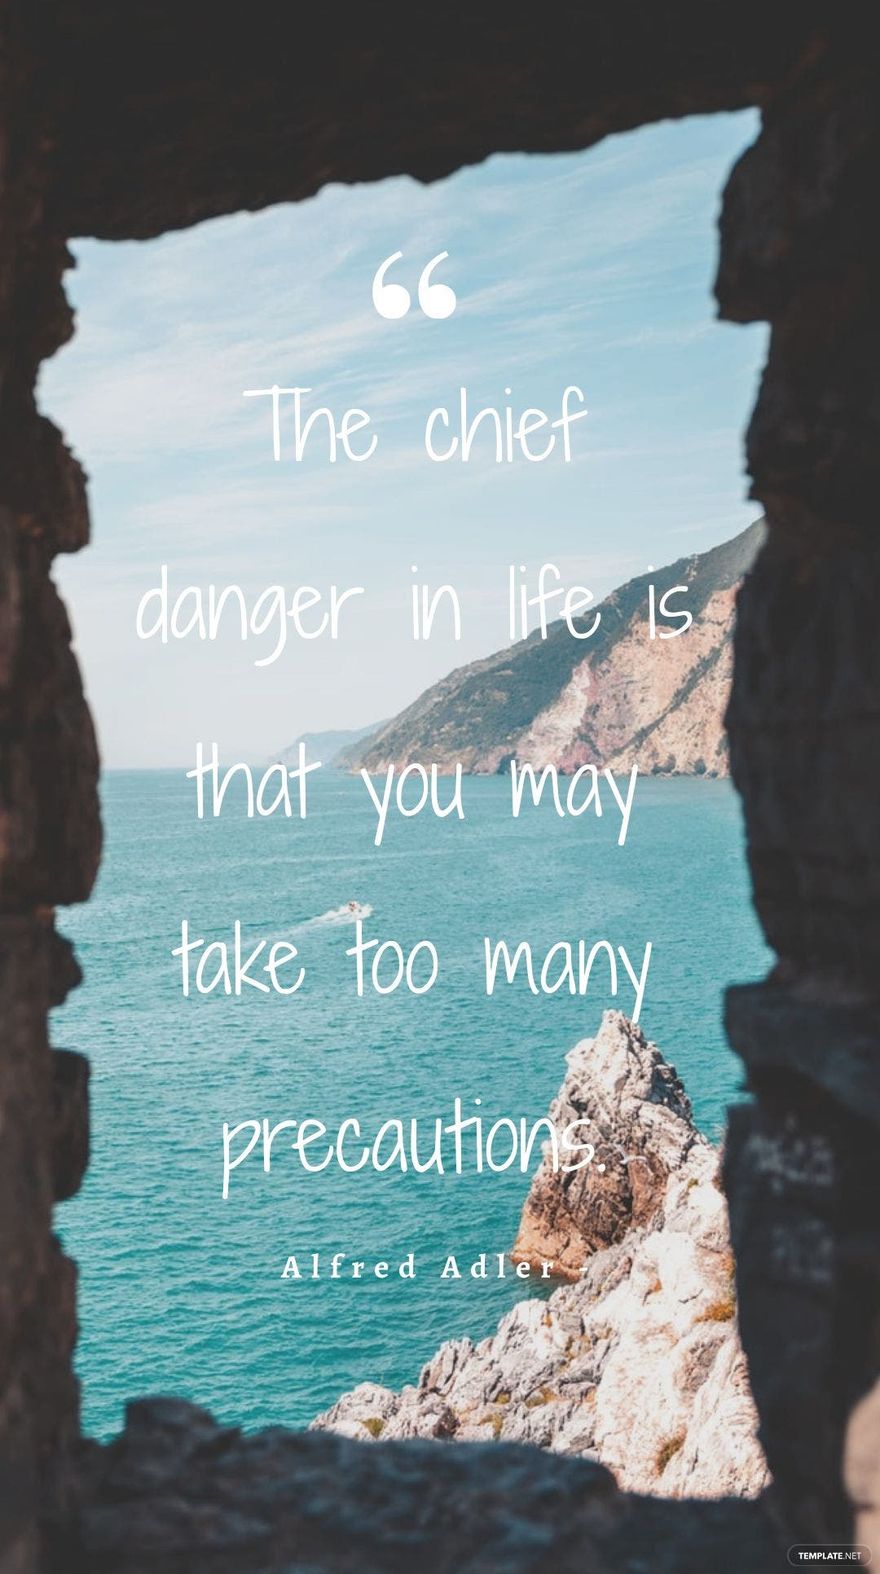 Alfred Adler - The chief danger in life is that you may take too many precautions.